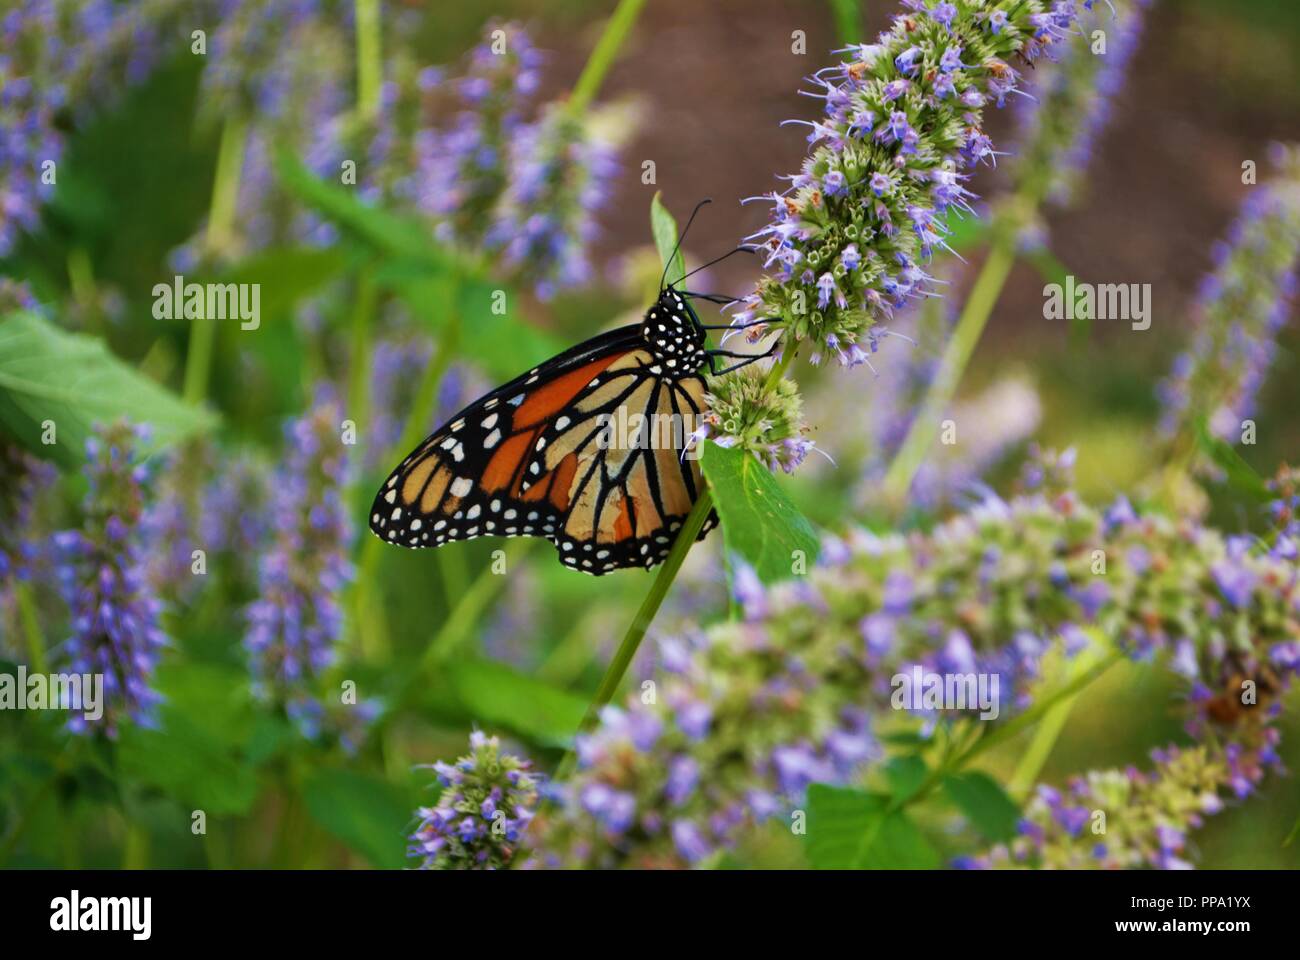 Monarch butterfly with a broken wing on a blue Veronica flower Stock Photo